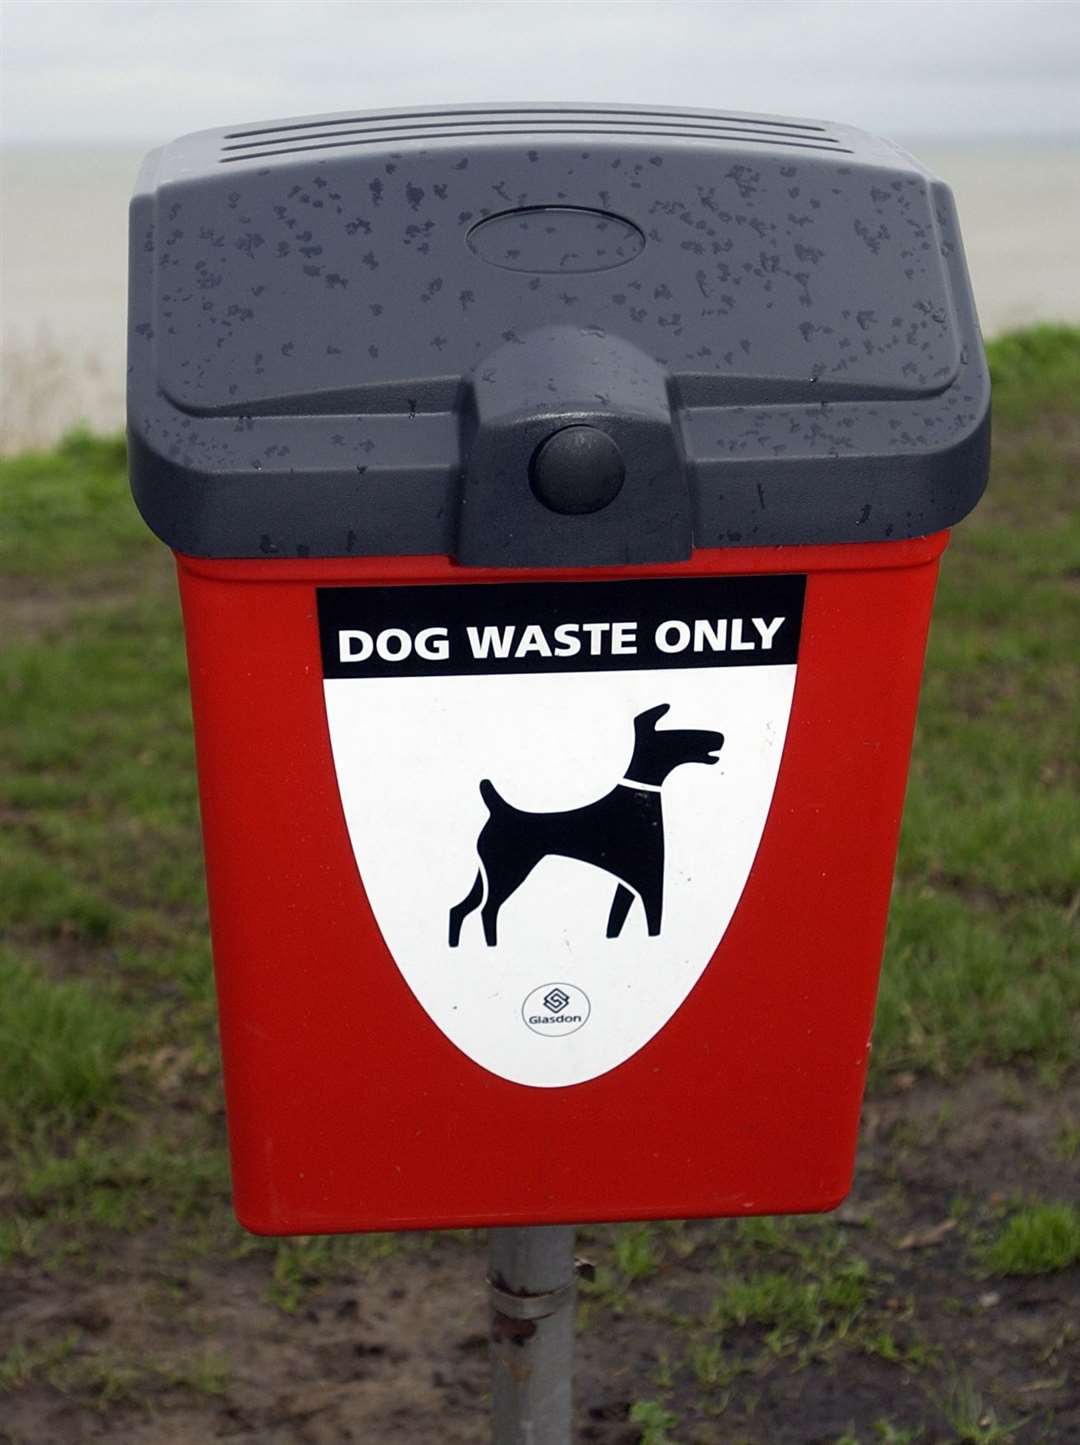 The council wants everyone to clean up after their pet